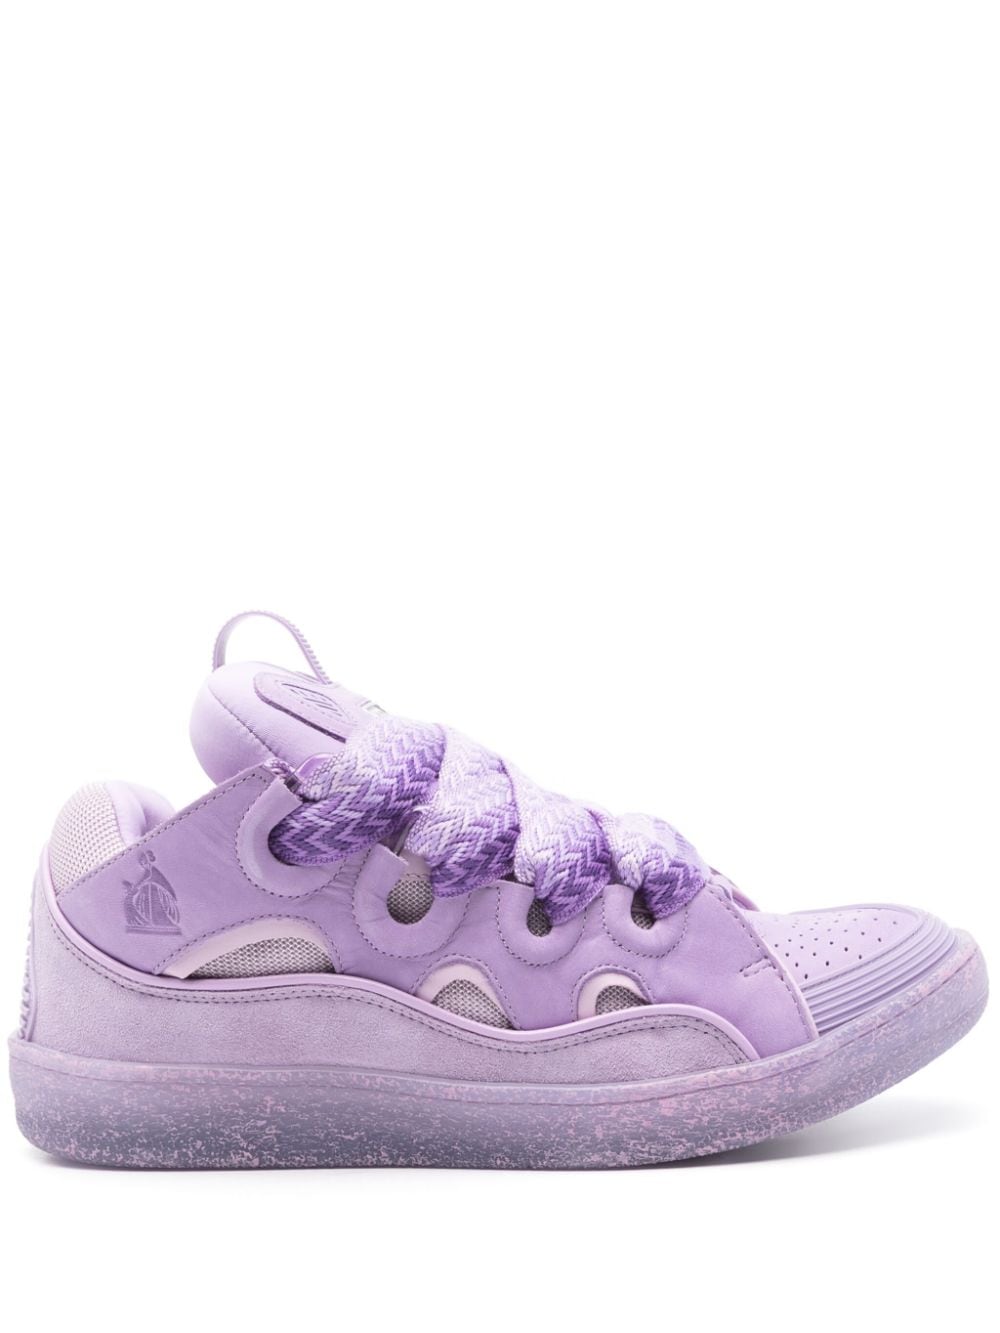 Lanvin Curb leather sneakers Purple